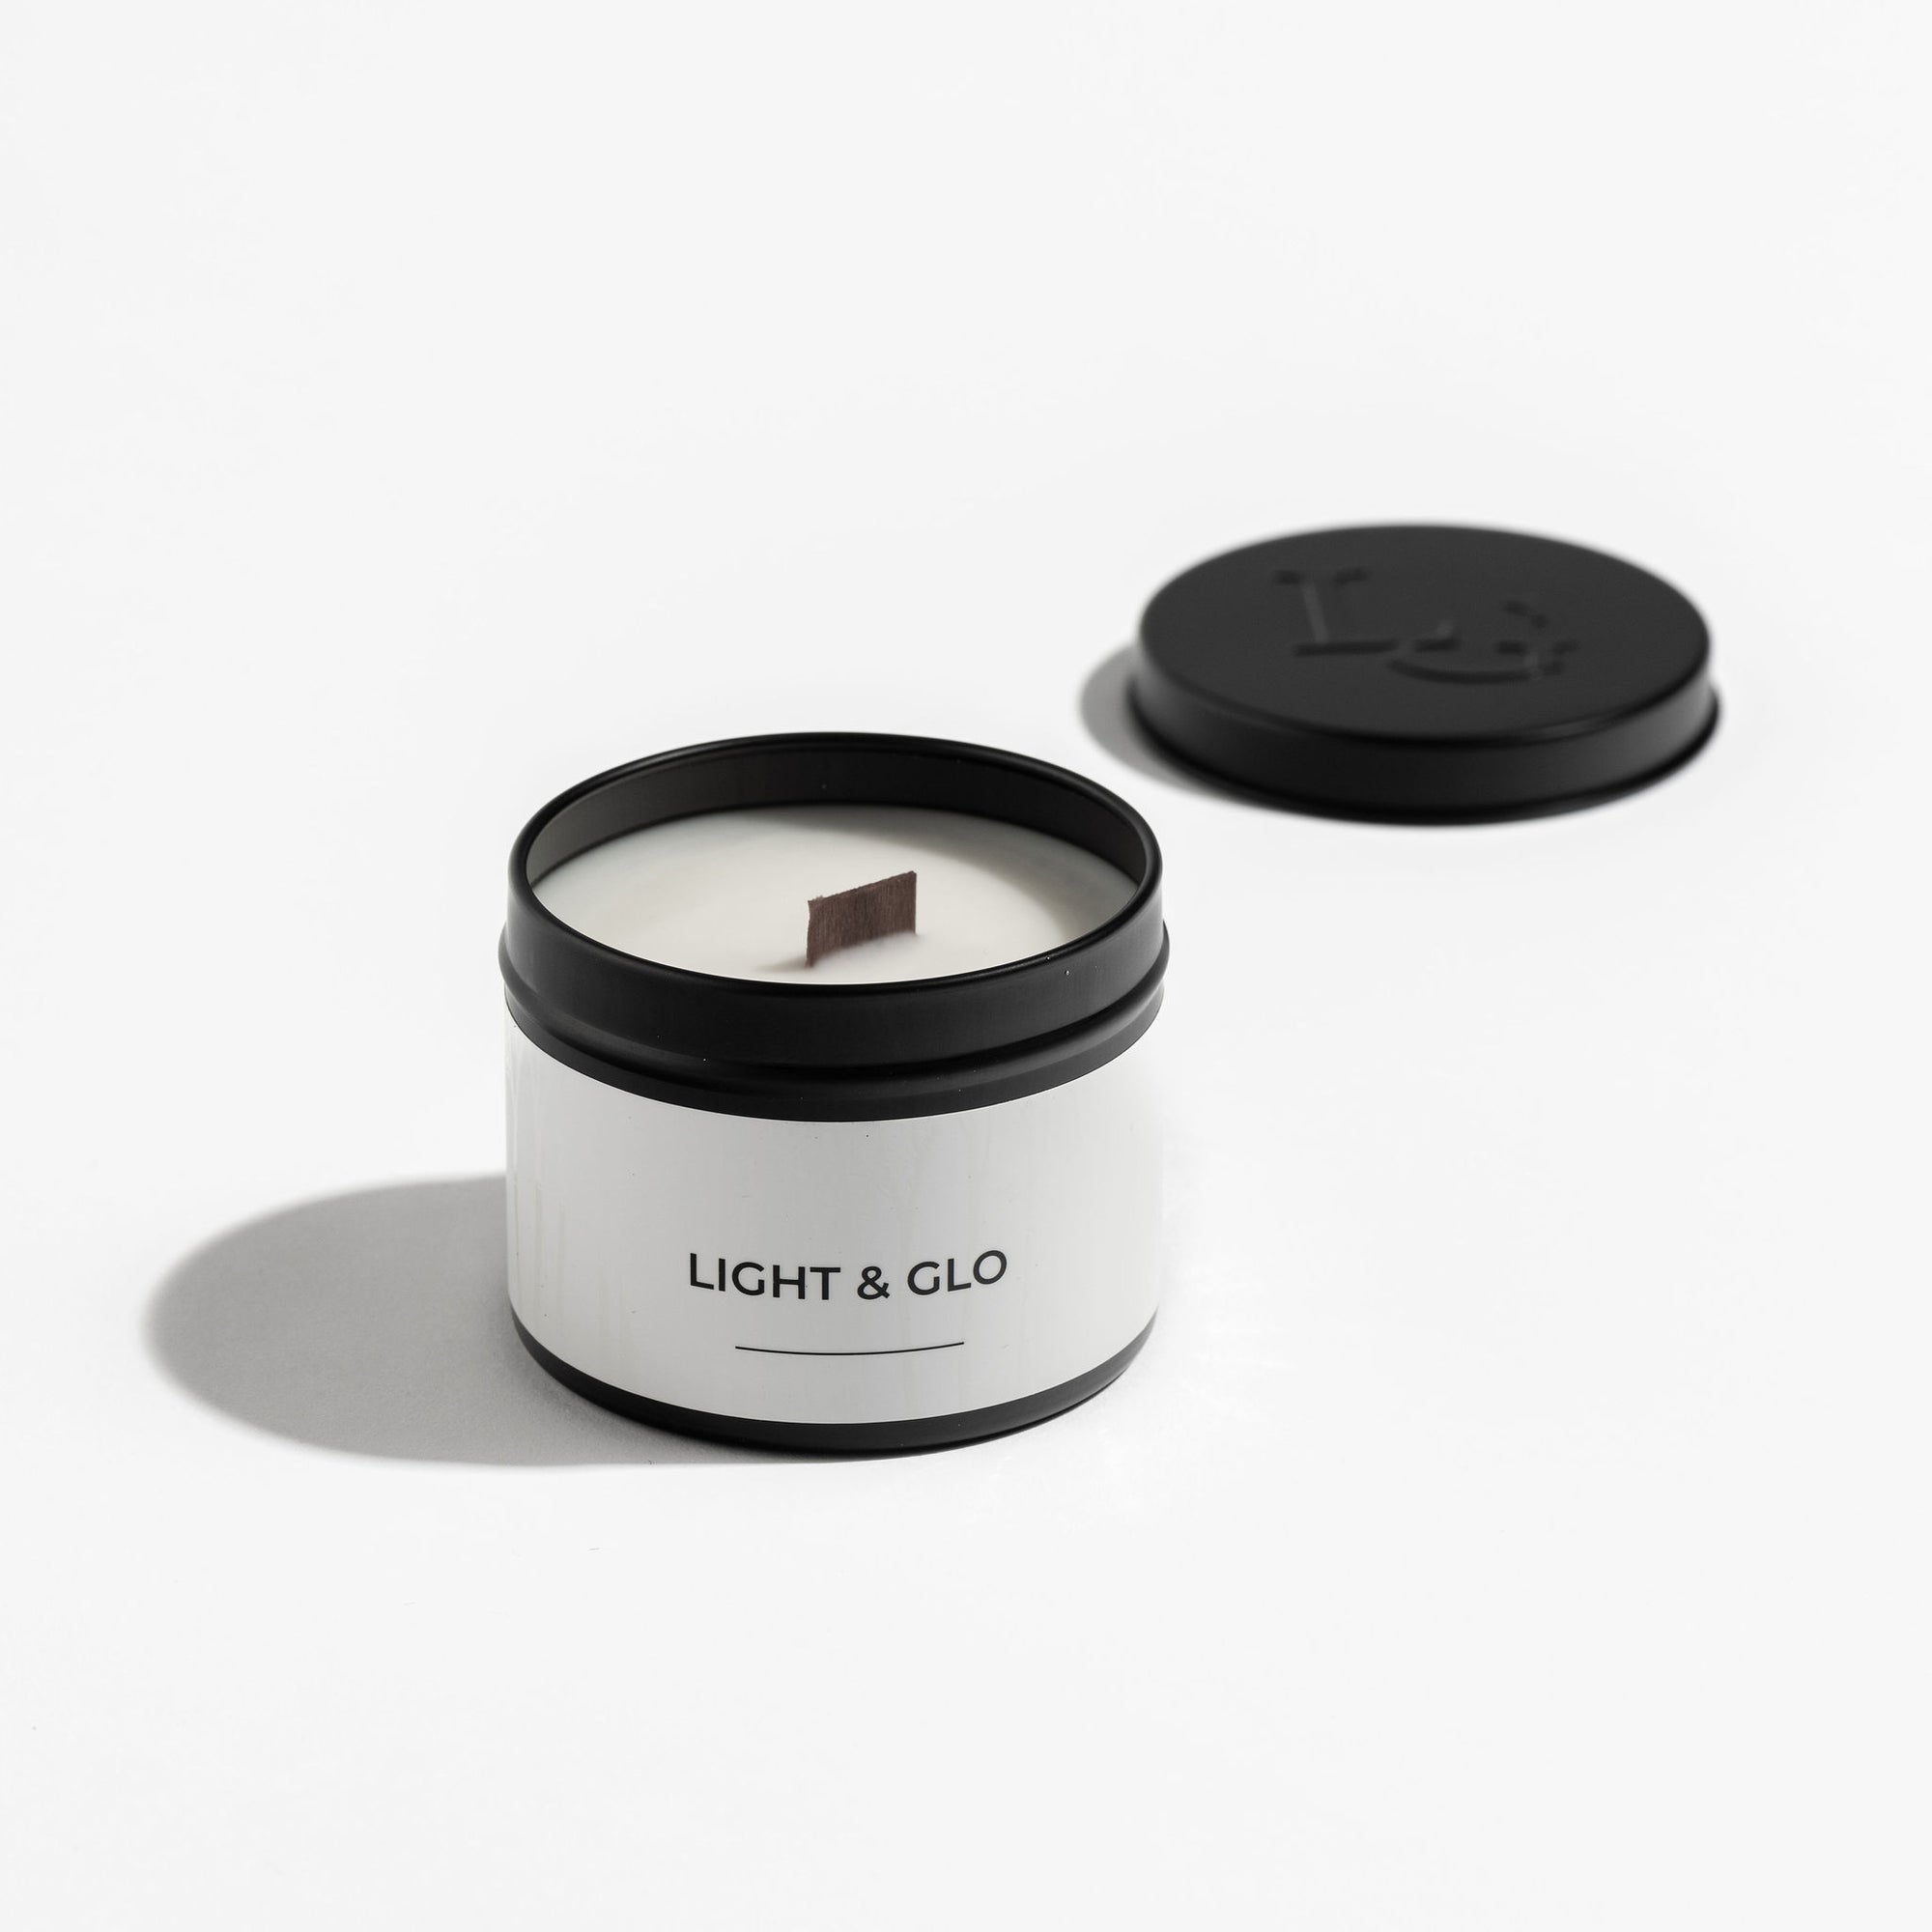 Cucumber & Basil - Monochrome Travel Candle | Luxury Candles & Home Fragrances by Light + Glo